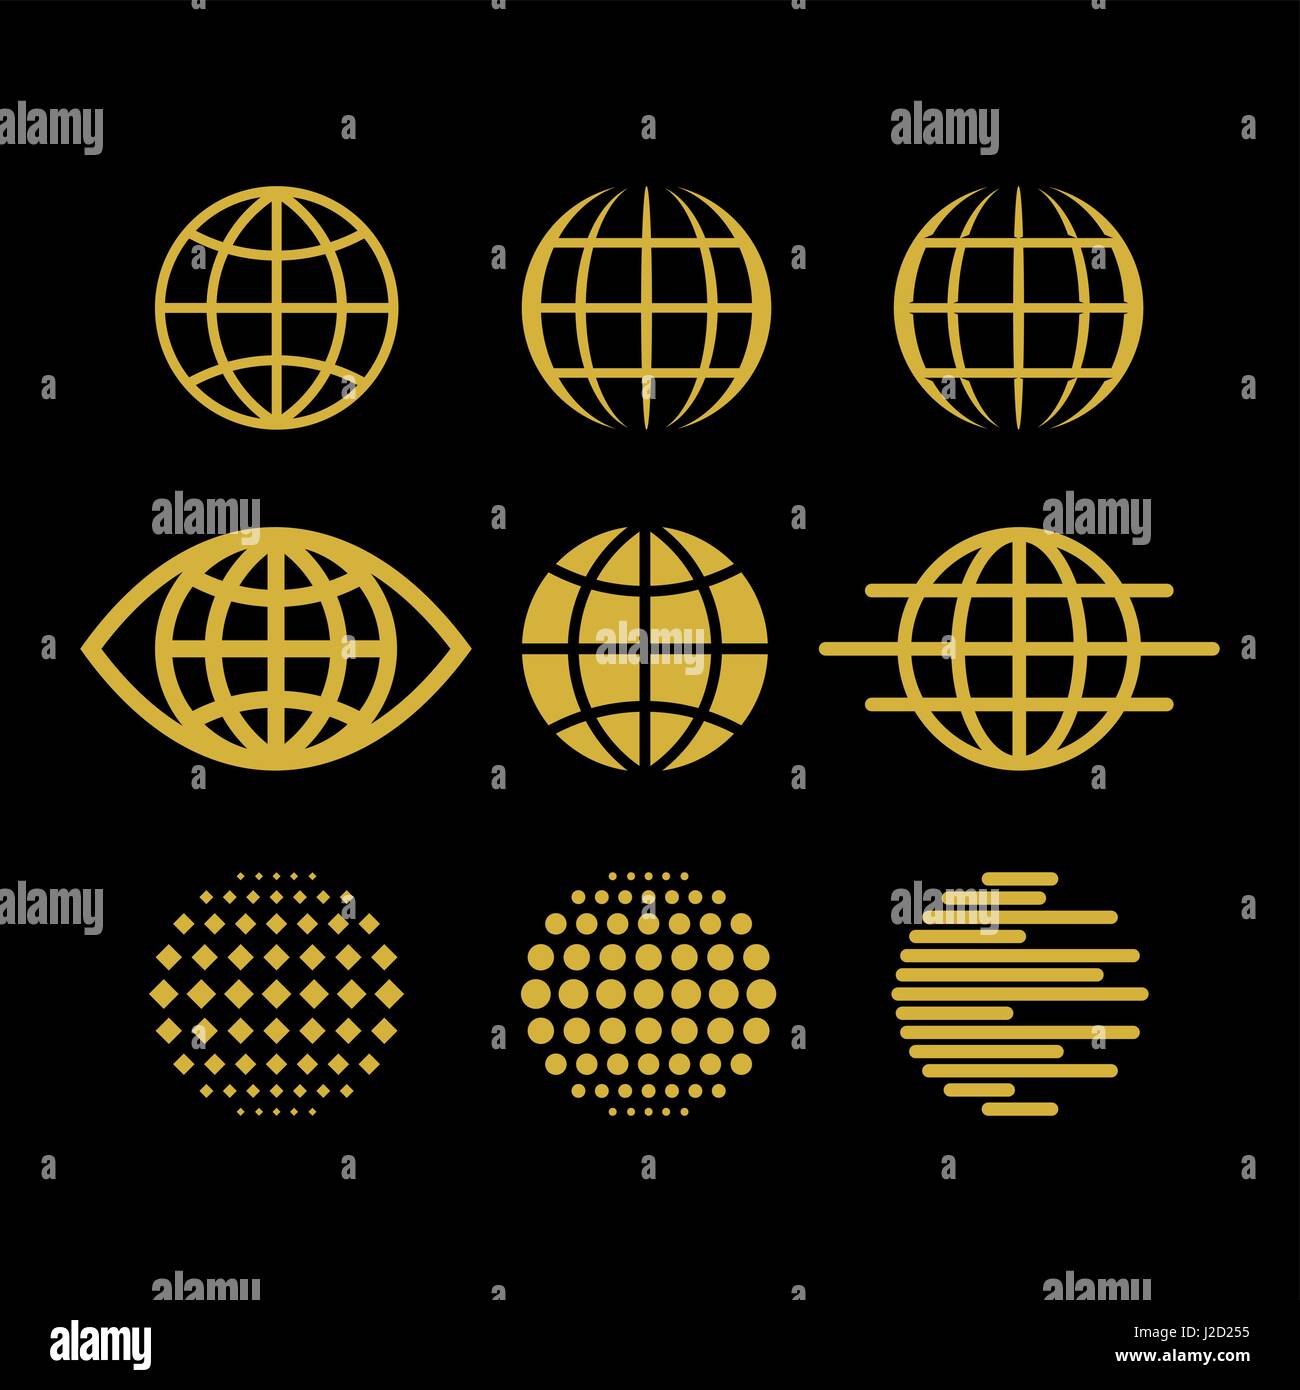 Big set of vector globes, collection of design elements for creating logos. Stock Vector